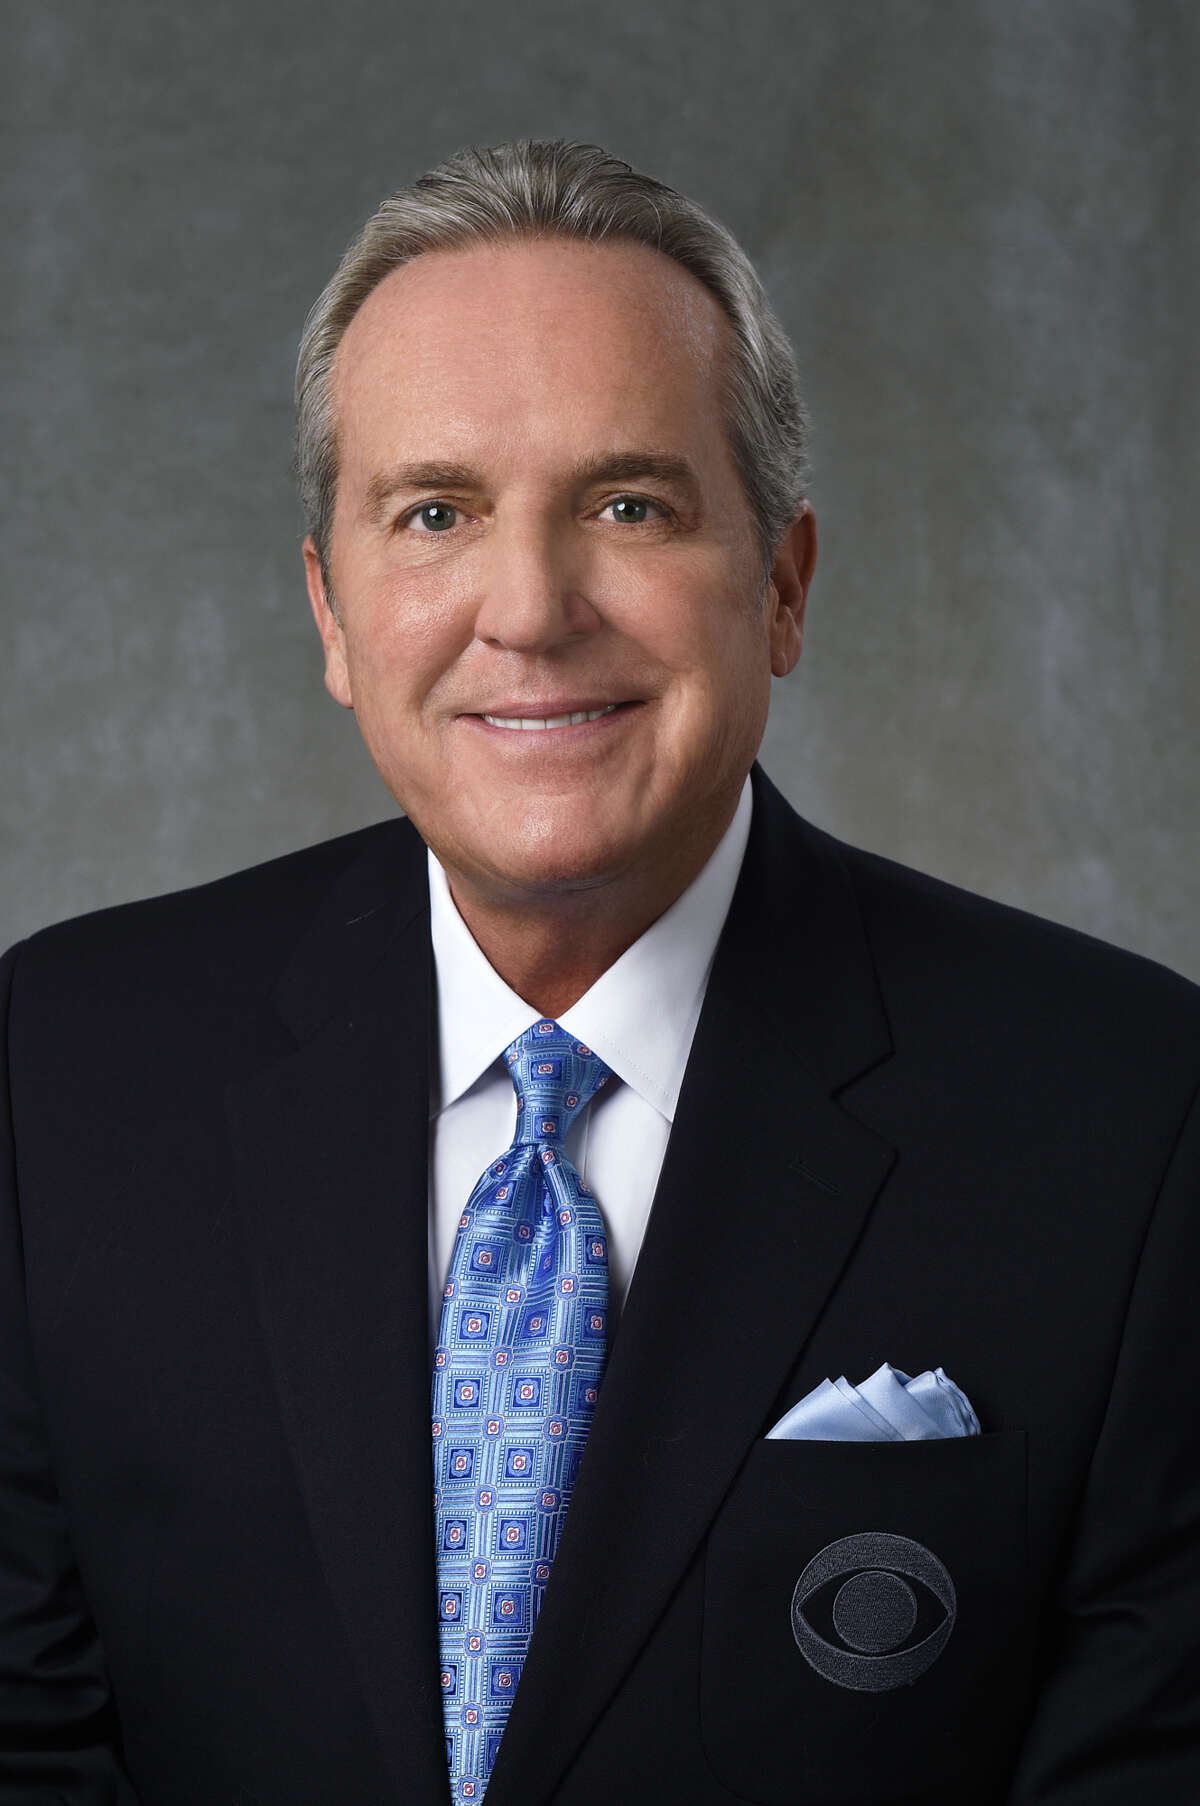 Brad Nessler CBS College Football Play-by-Play Announcer Photo CR: Michele Crowe/CBS CBS c.2016 CBS Broadcasting Inc. All Rights Reserved